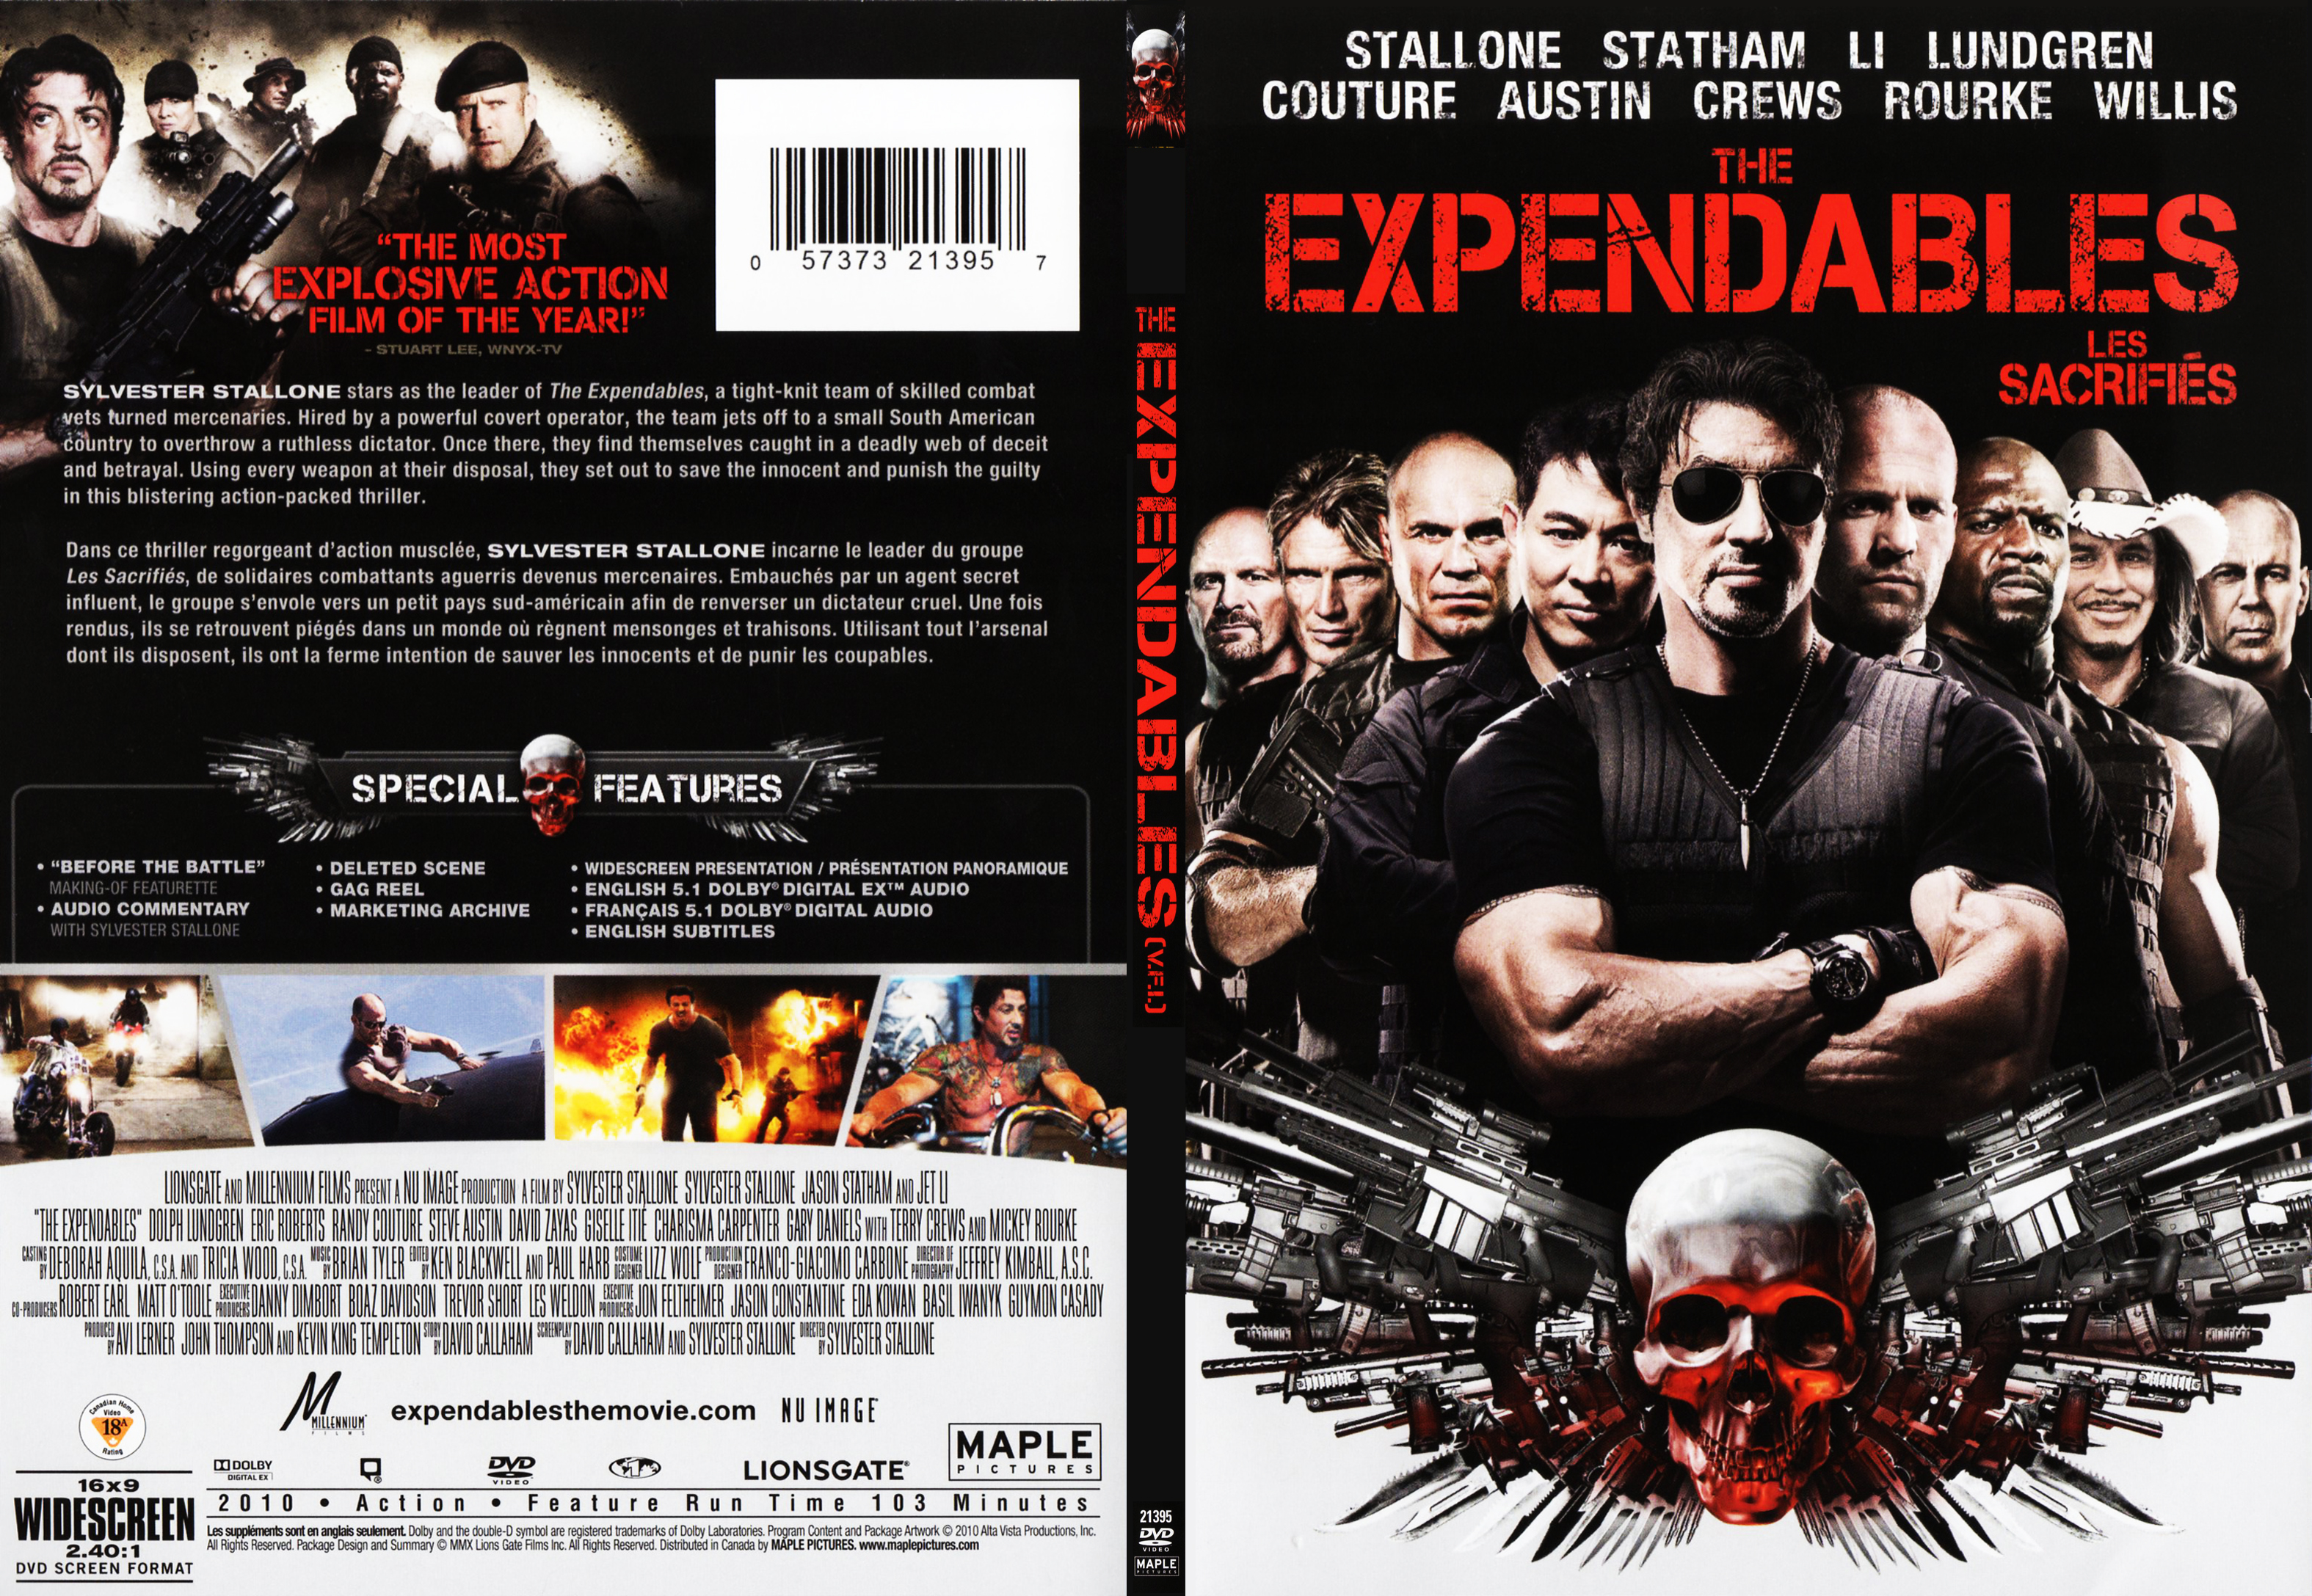 Jaquette DVD The expendables - SLIM